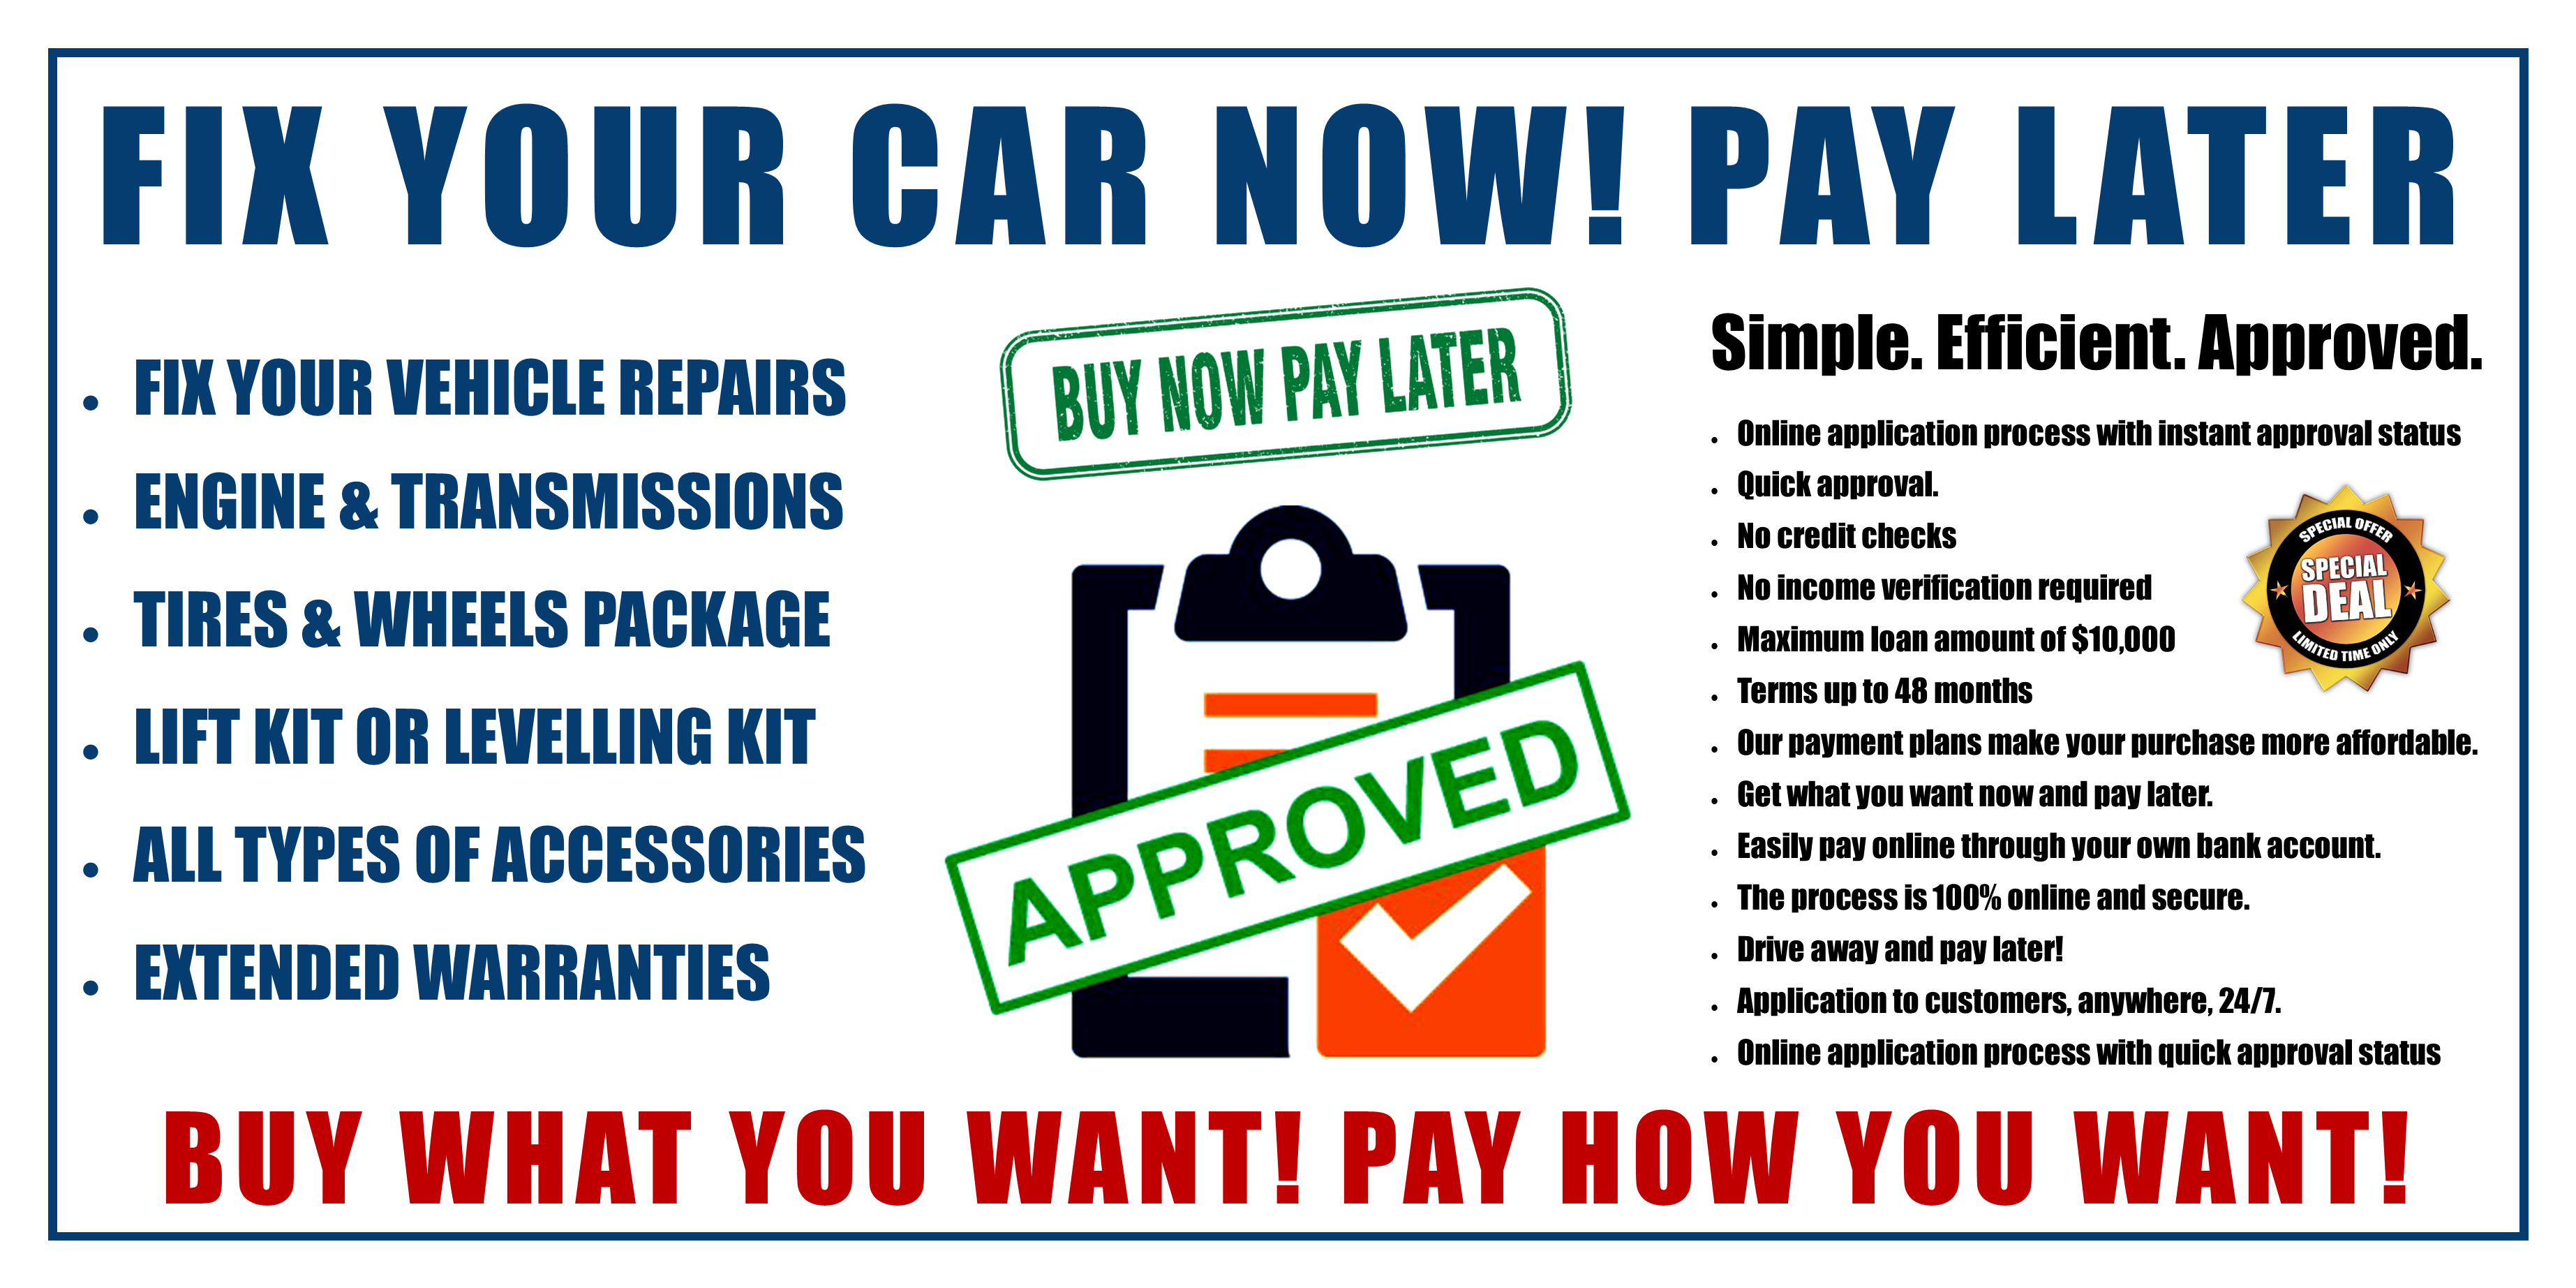 Fix your car now and pay later.